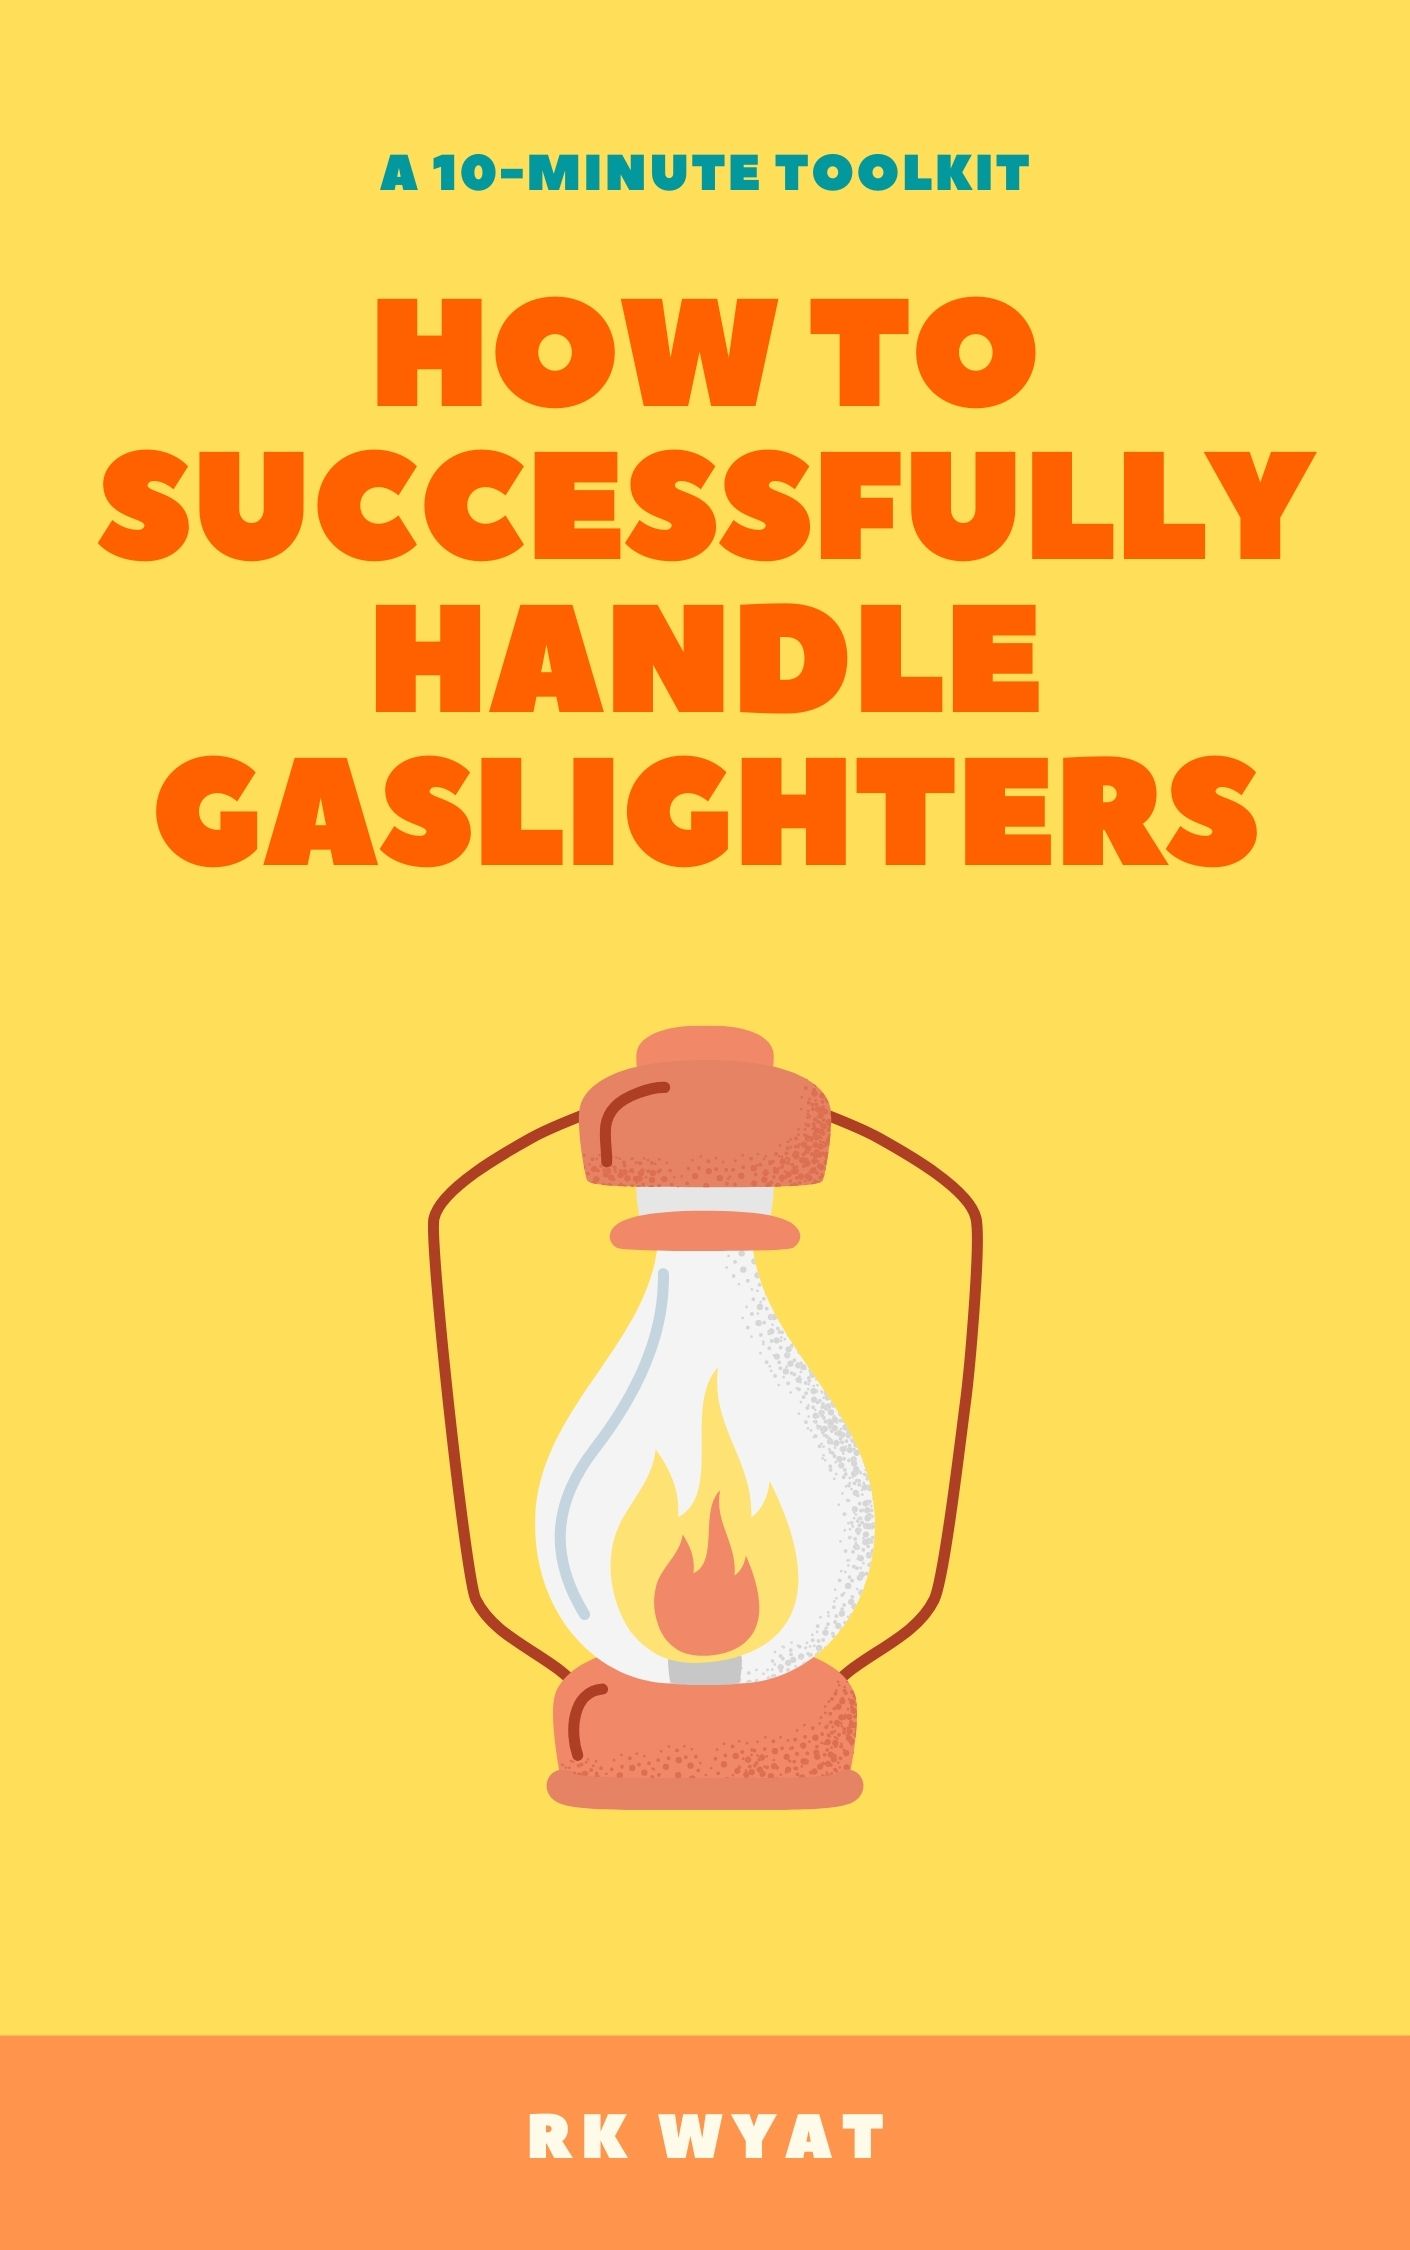 RK Wyat: How to Successfully Handle Gaslighters